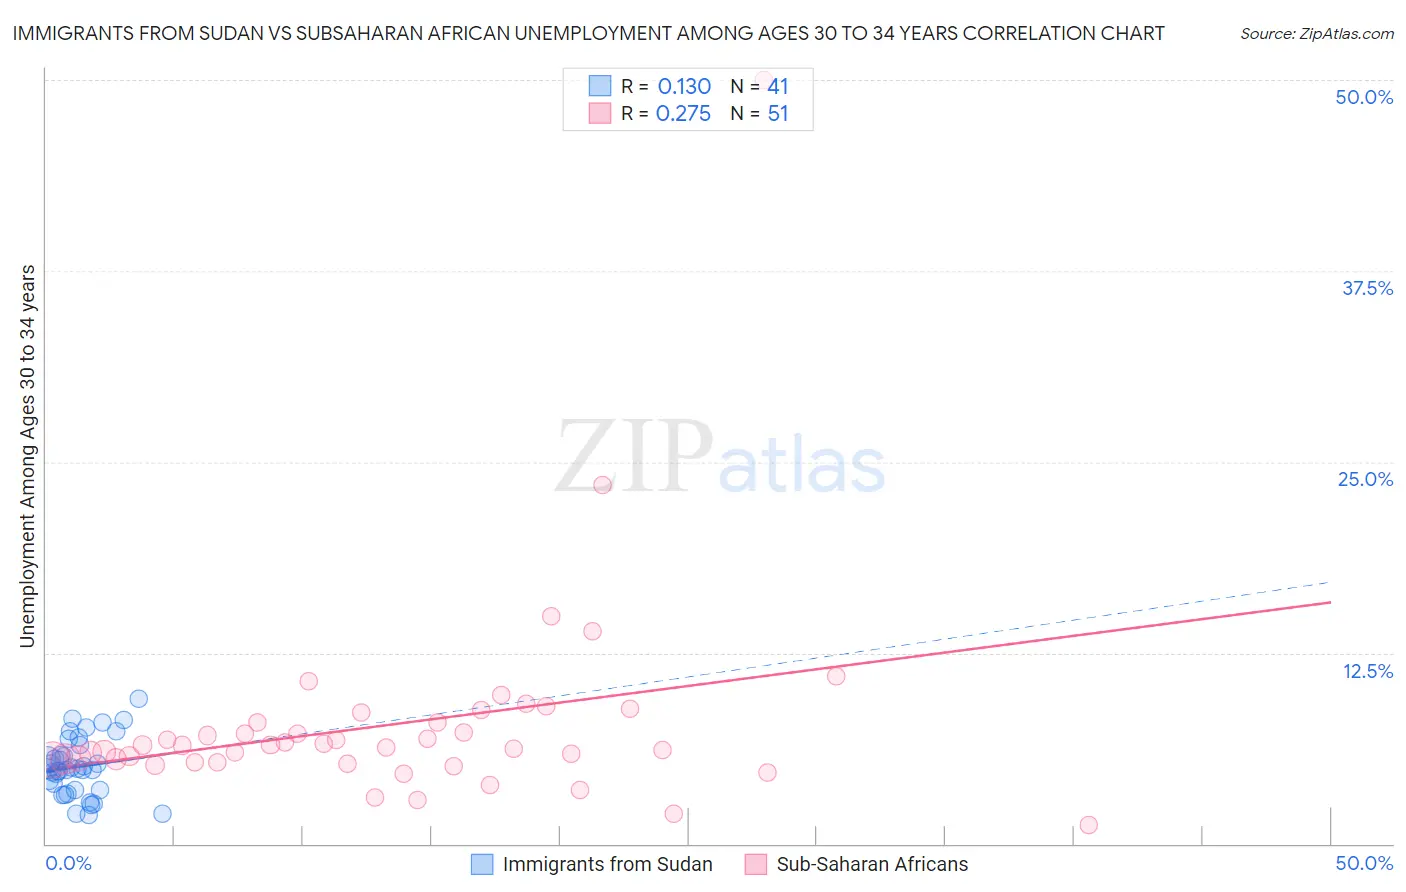 Immigrants from Sudan vs Subsaharan African Unemployment Among Ages 30 to 34 years